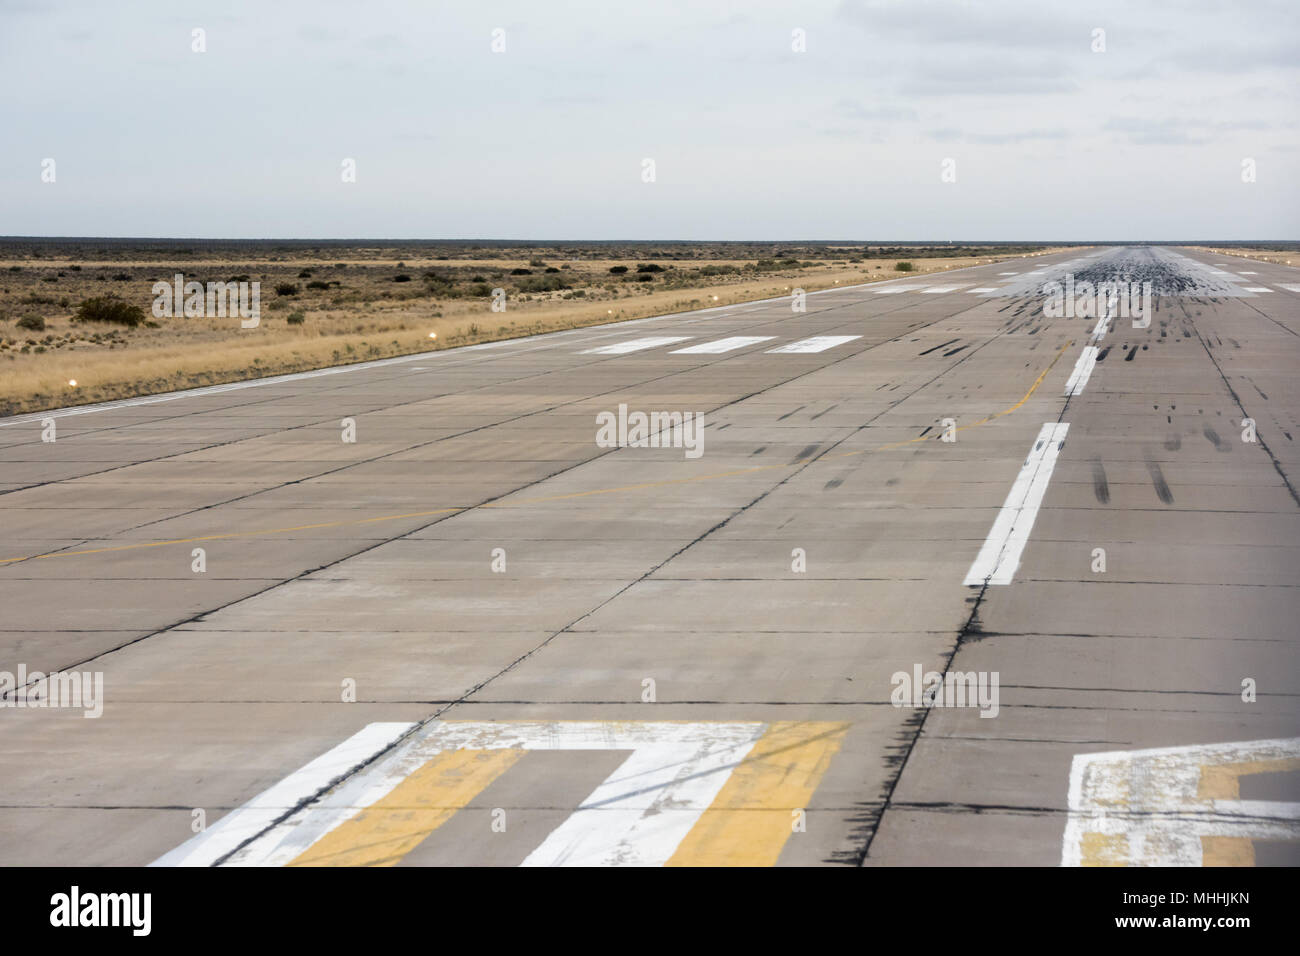 Trelew patagonia airport Landing and take off Zone Stock Photo